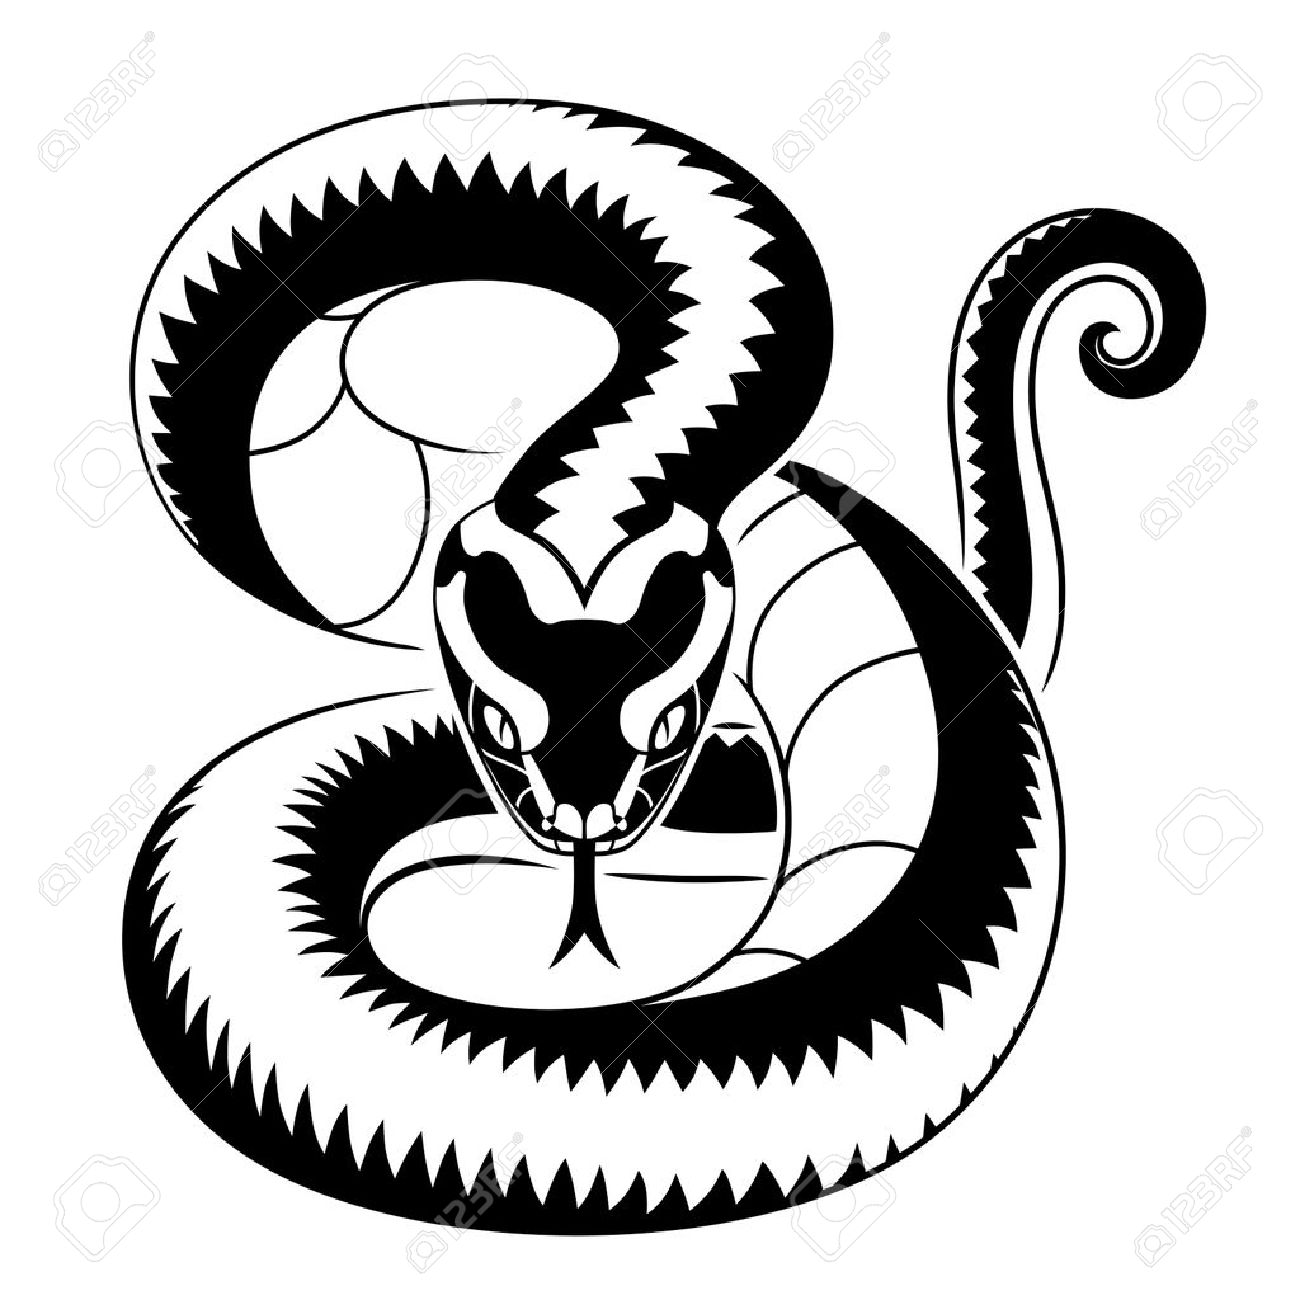 Serpent clipart #10, Download drawings